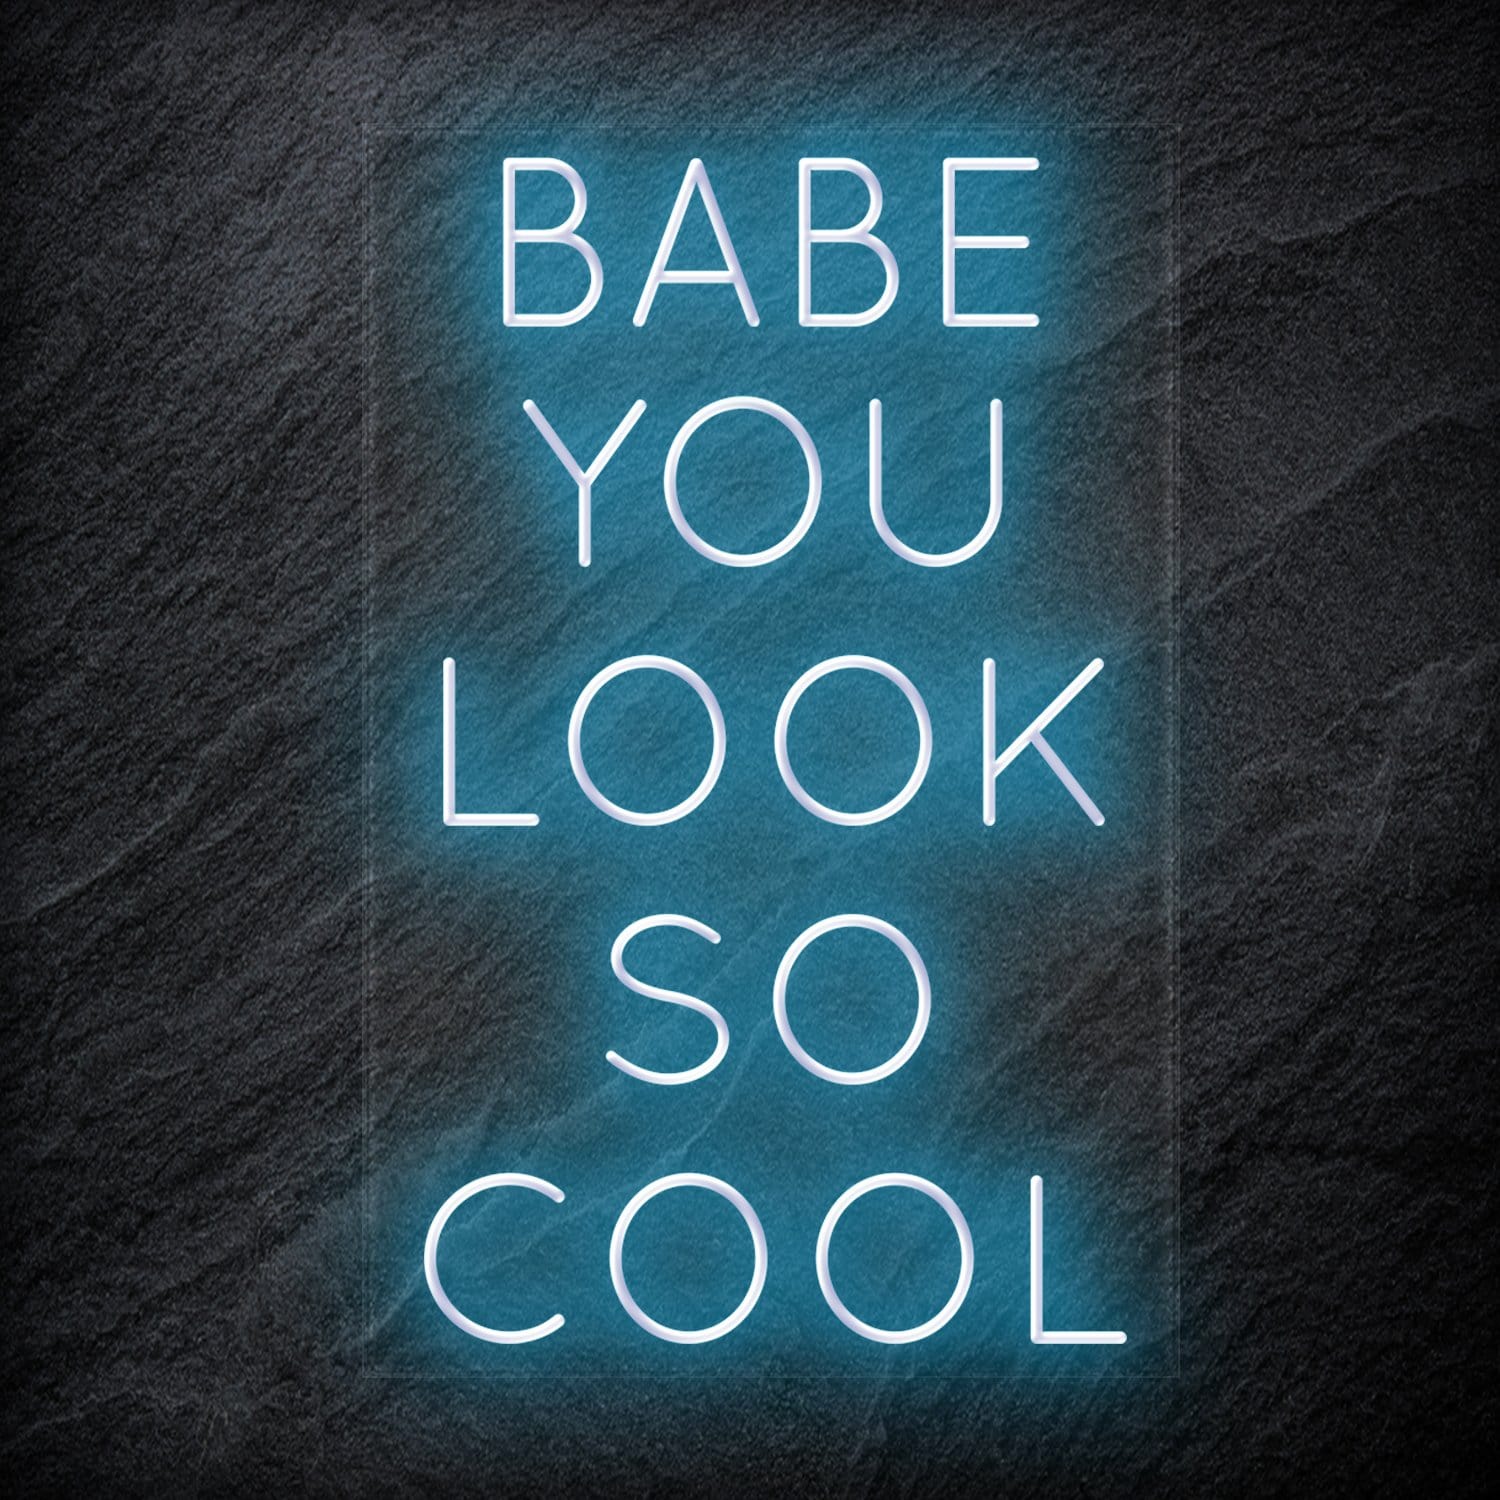 "Babe You Look So Cool" LED Neon Sign Schriftzug - NEONEVERGLOW